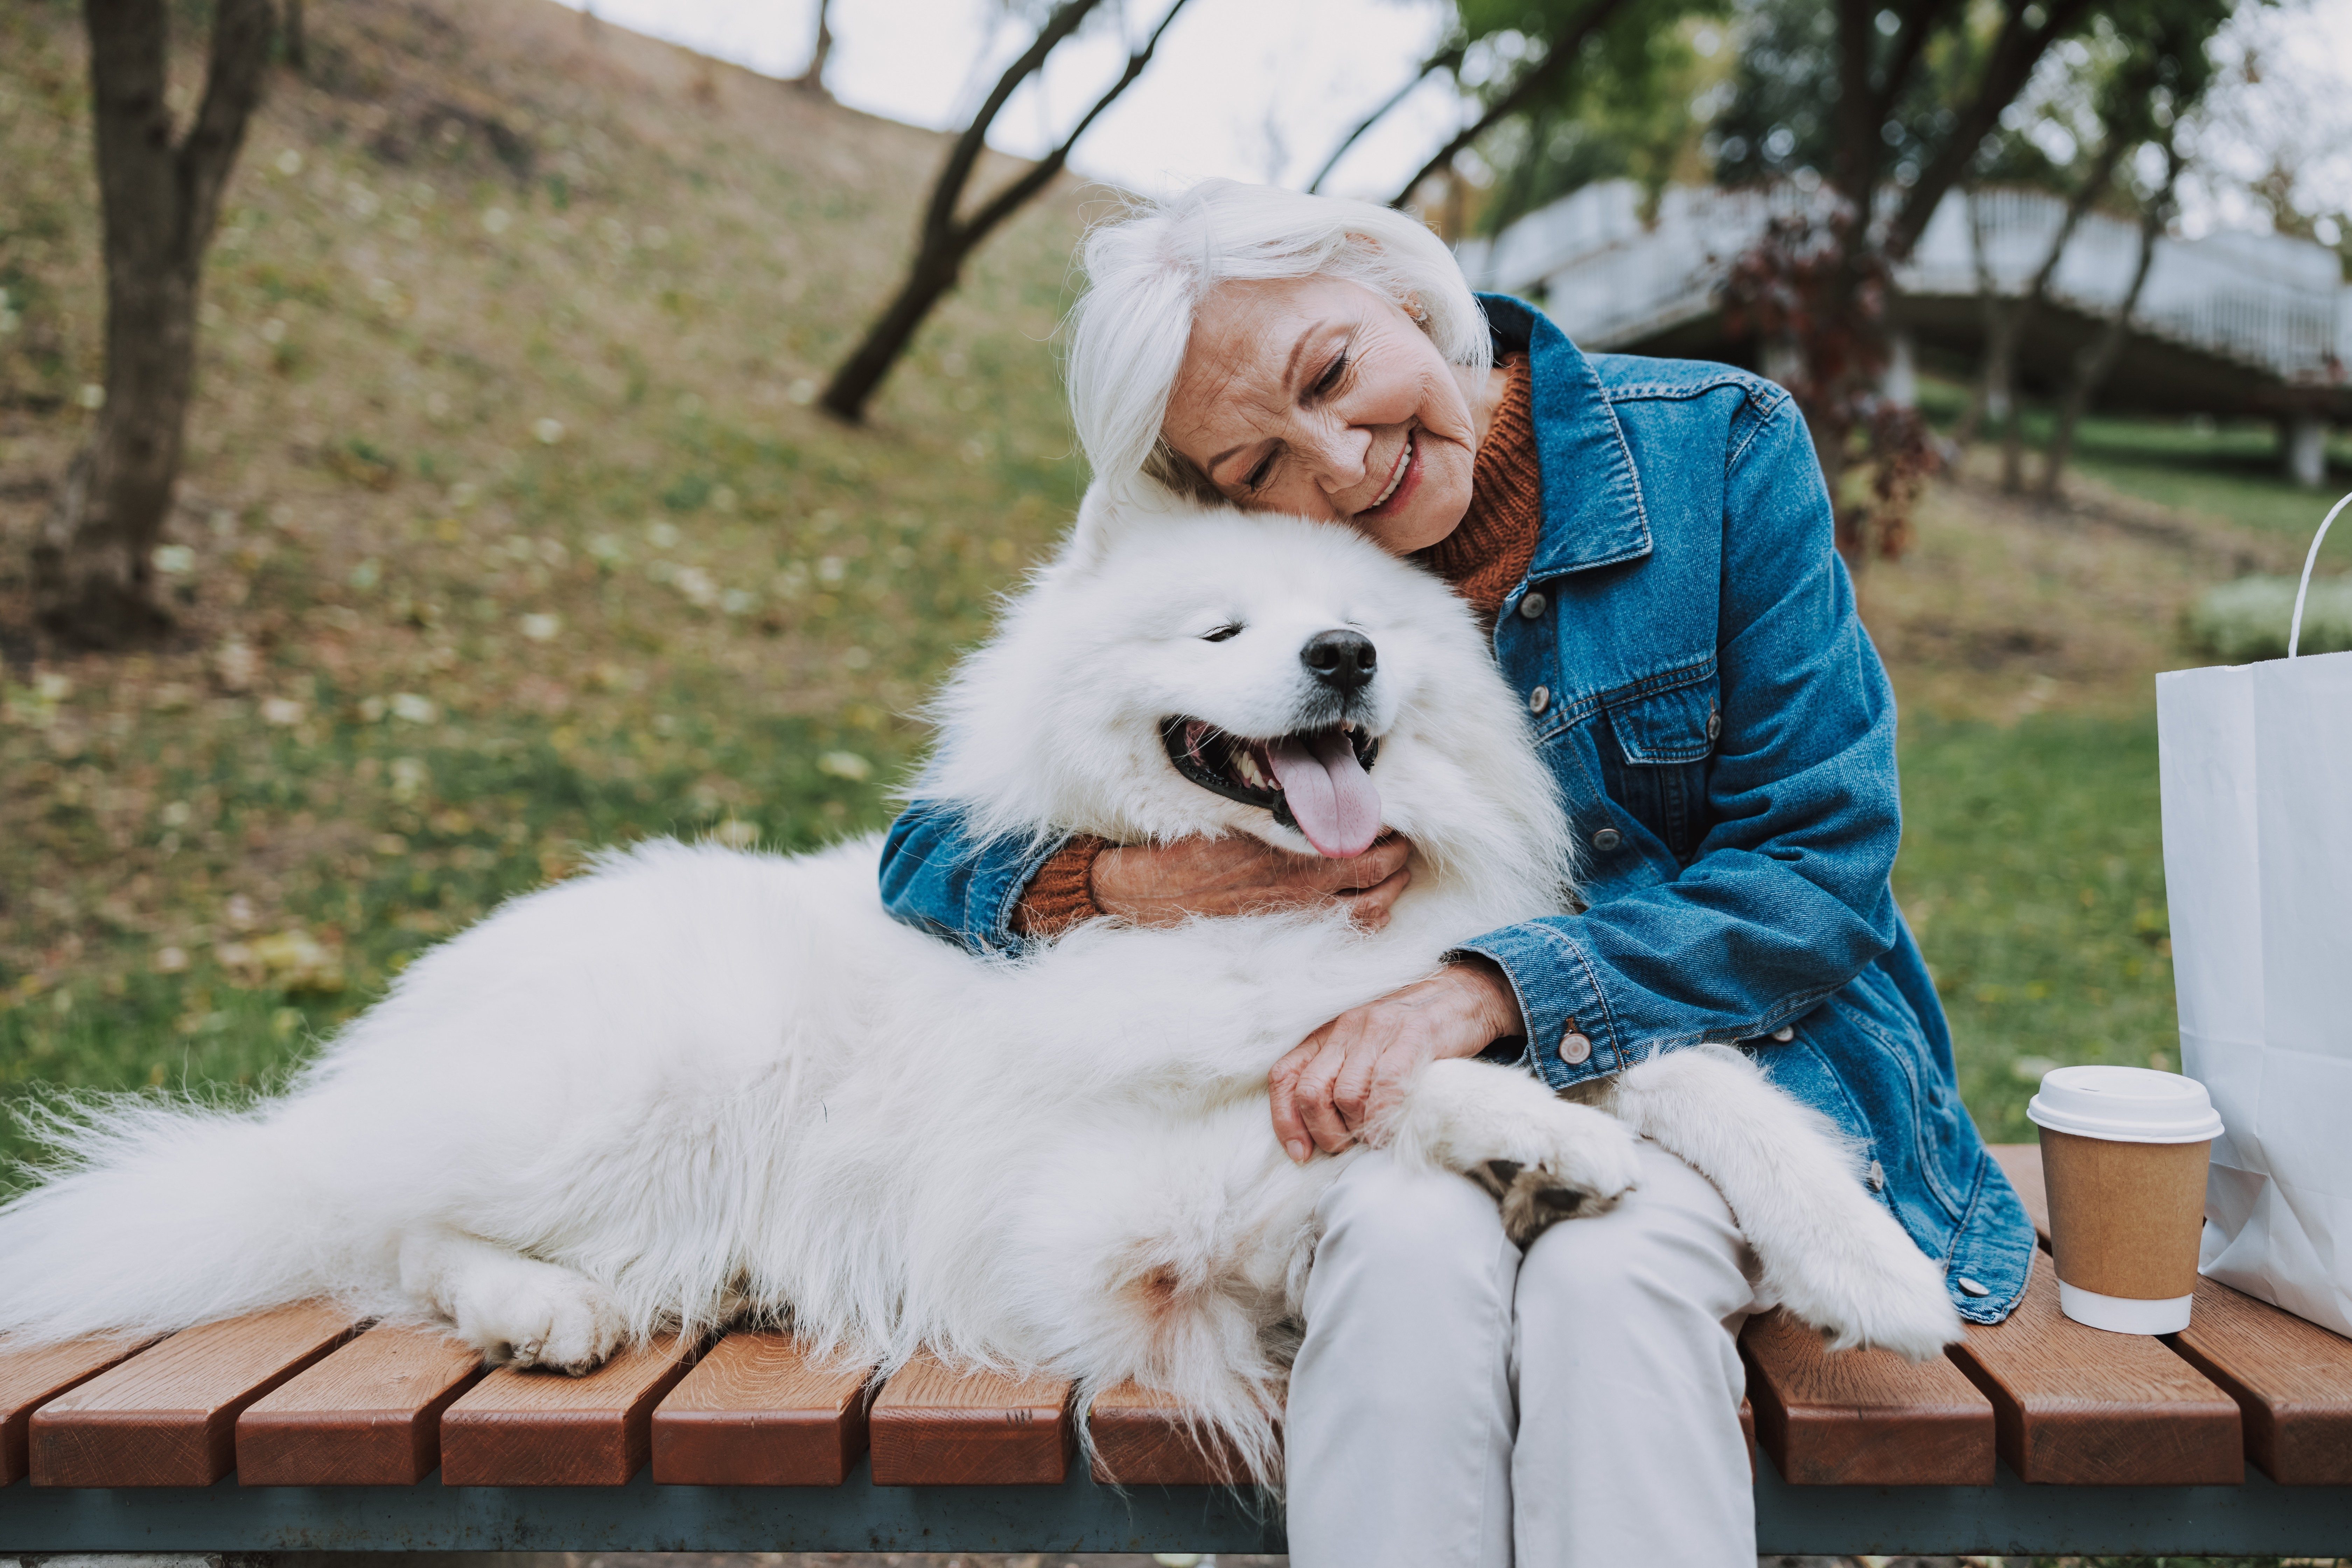 Caucasian smiling woman sitting on bench with dog